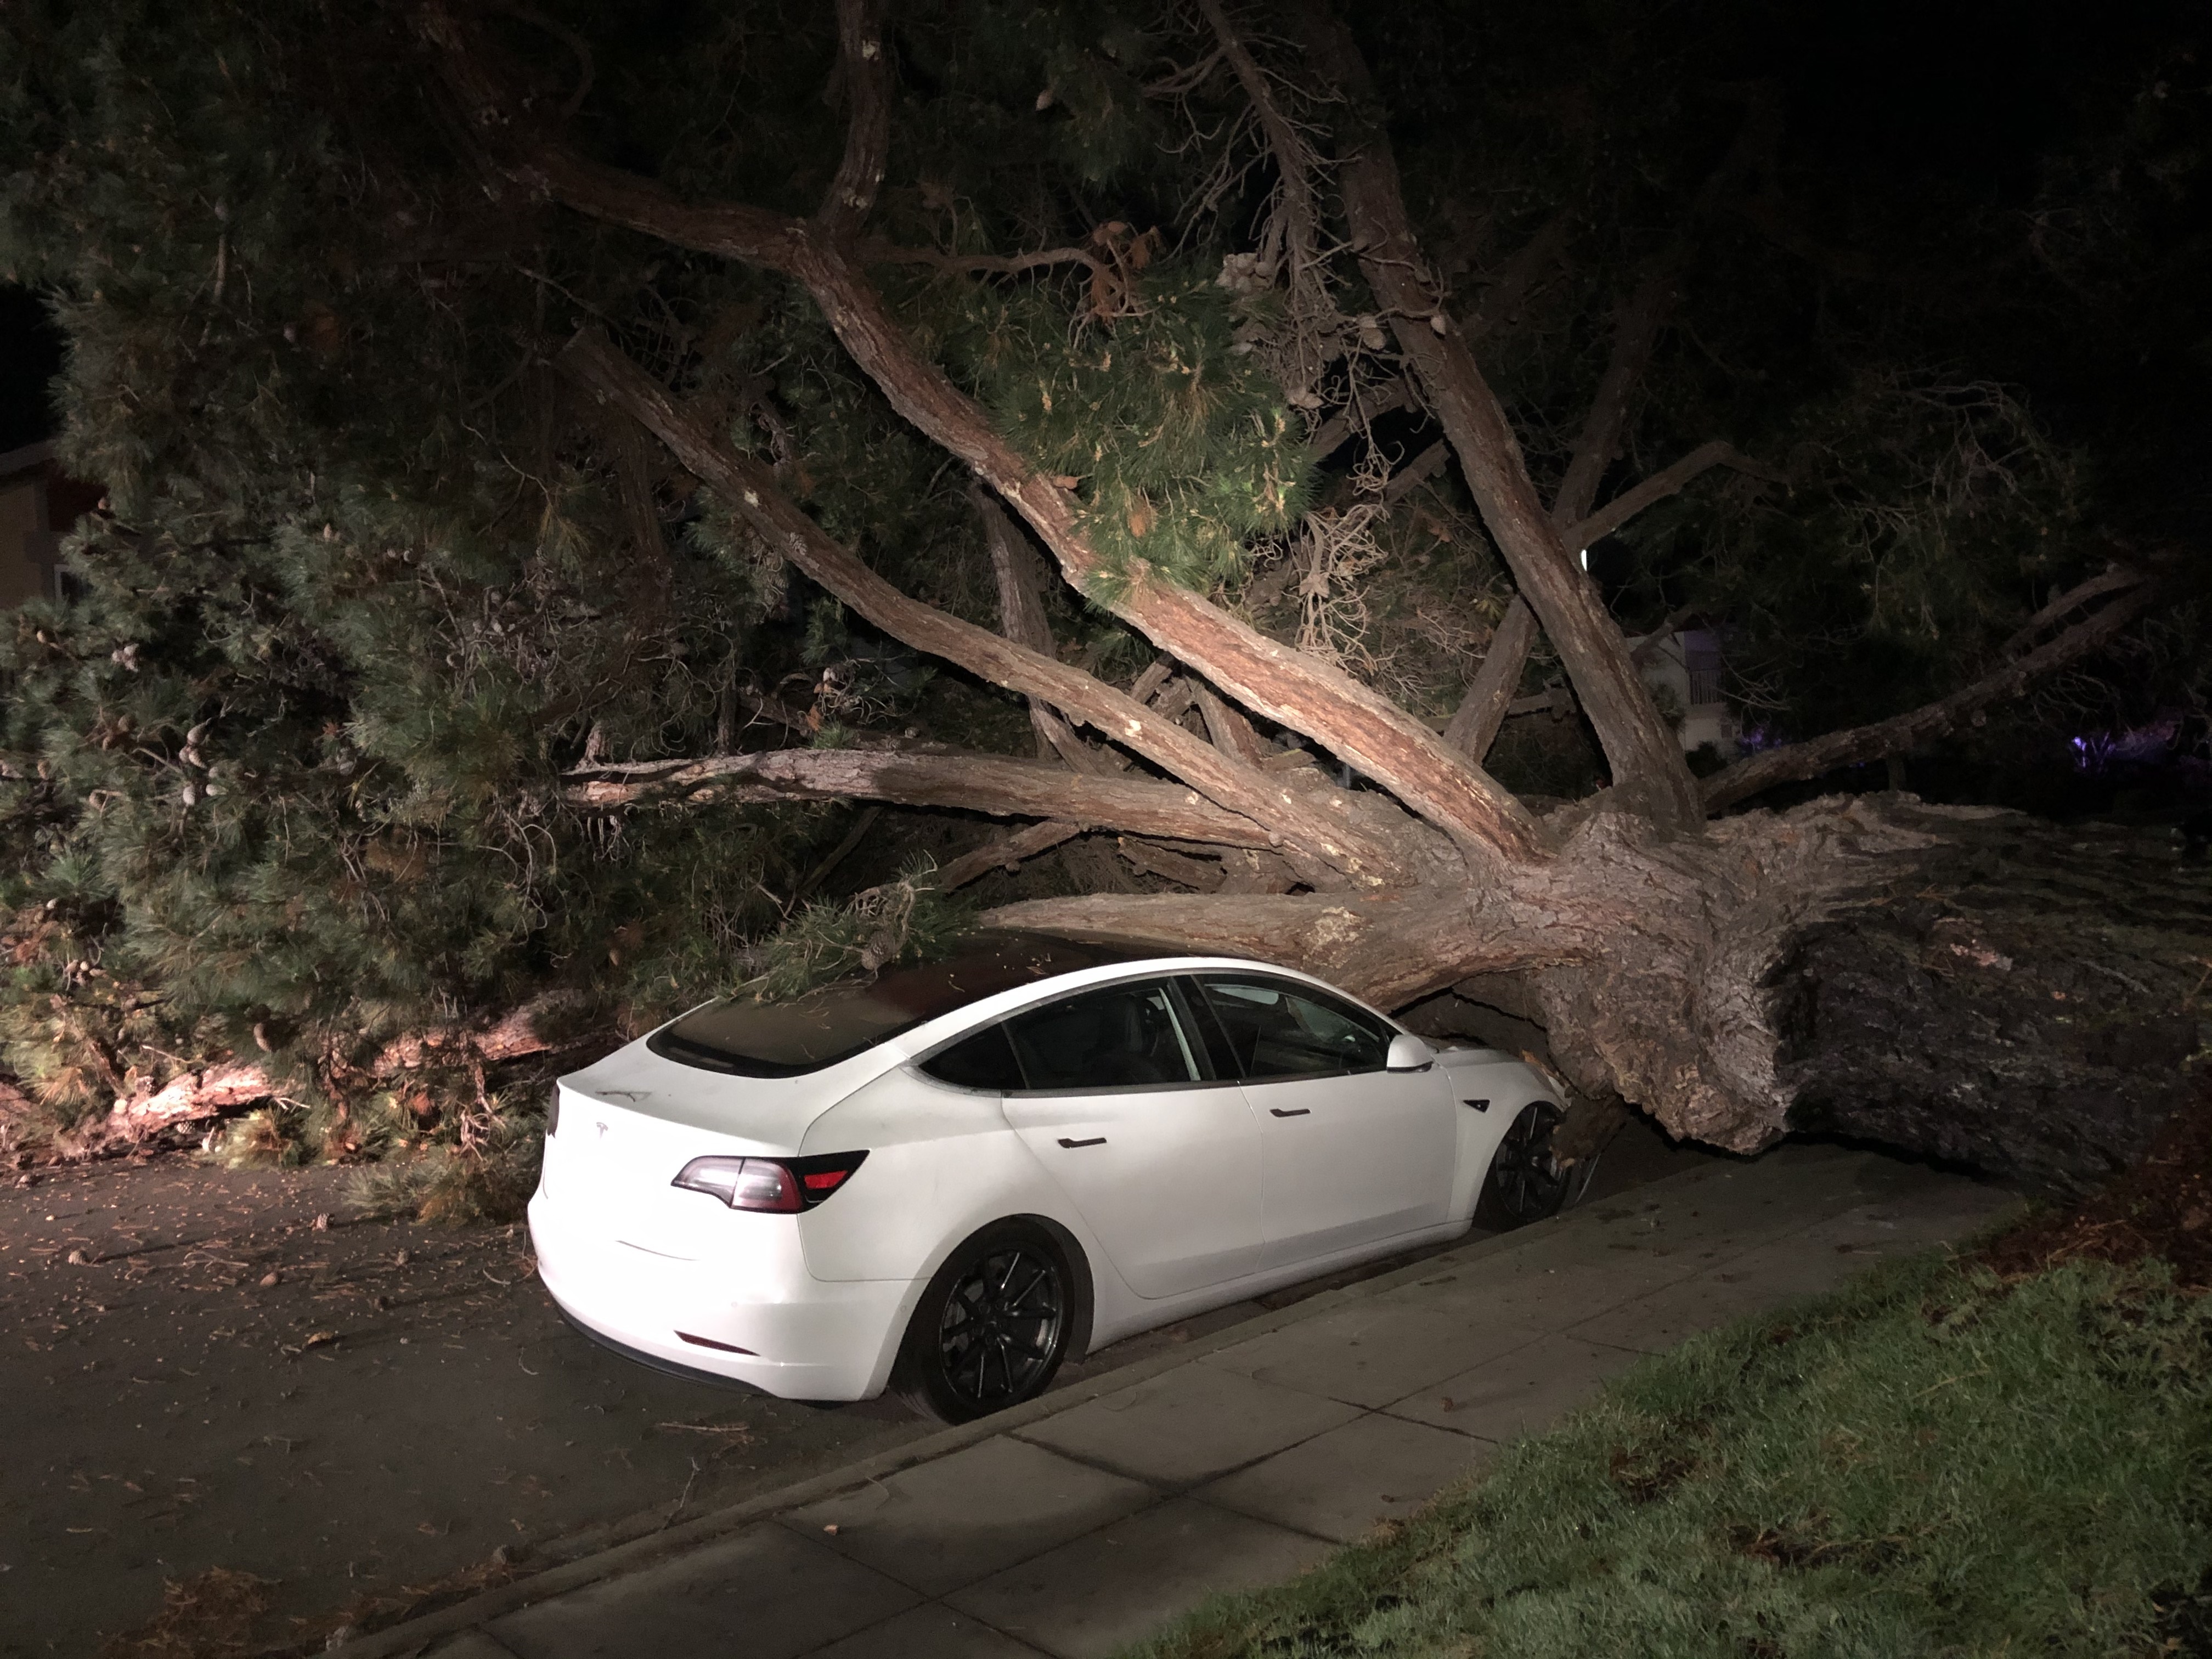 A tree crashed onto Catamaran Street between Ketch Court and Yawl Court in Foster City on February 24, 2020. (Foster City Police / Twitter)